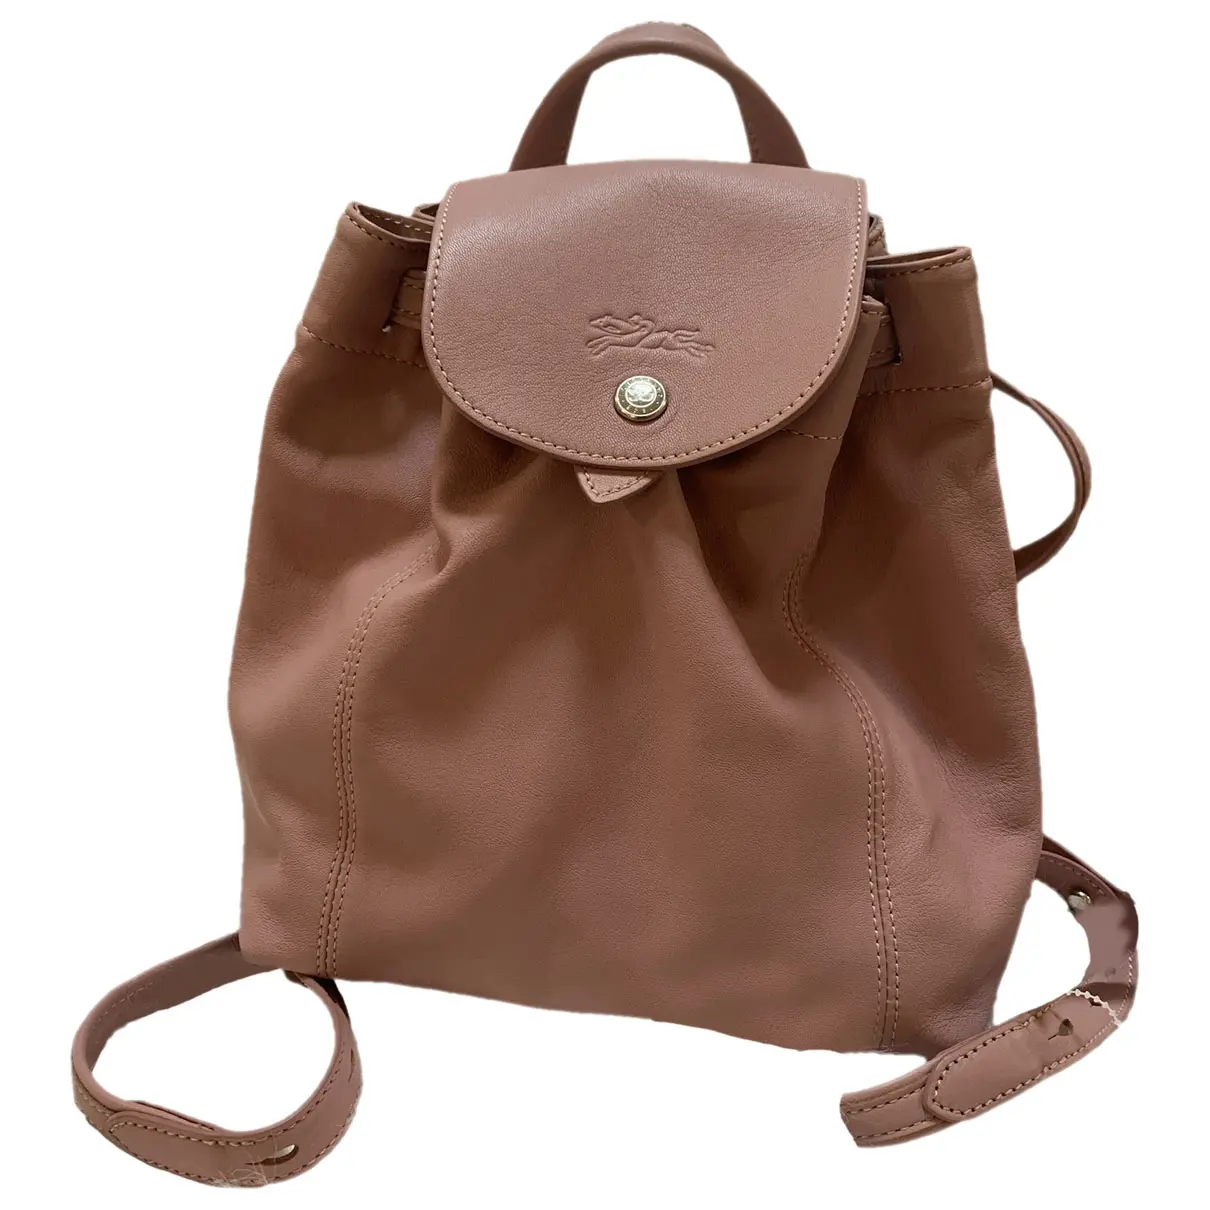 Pliage leather backpack